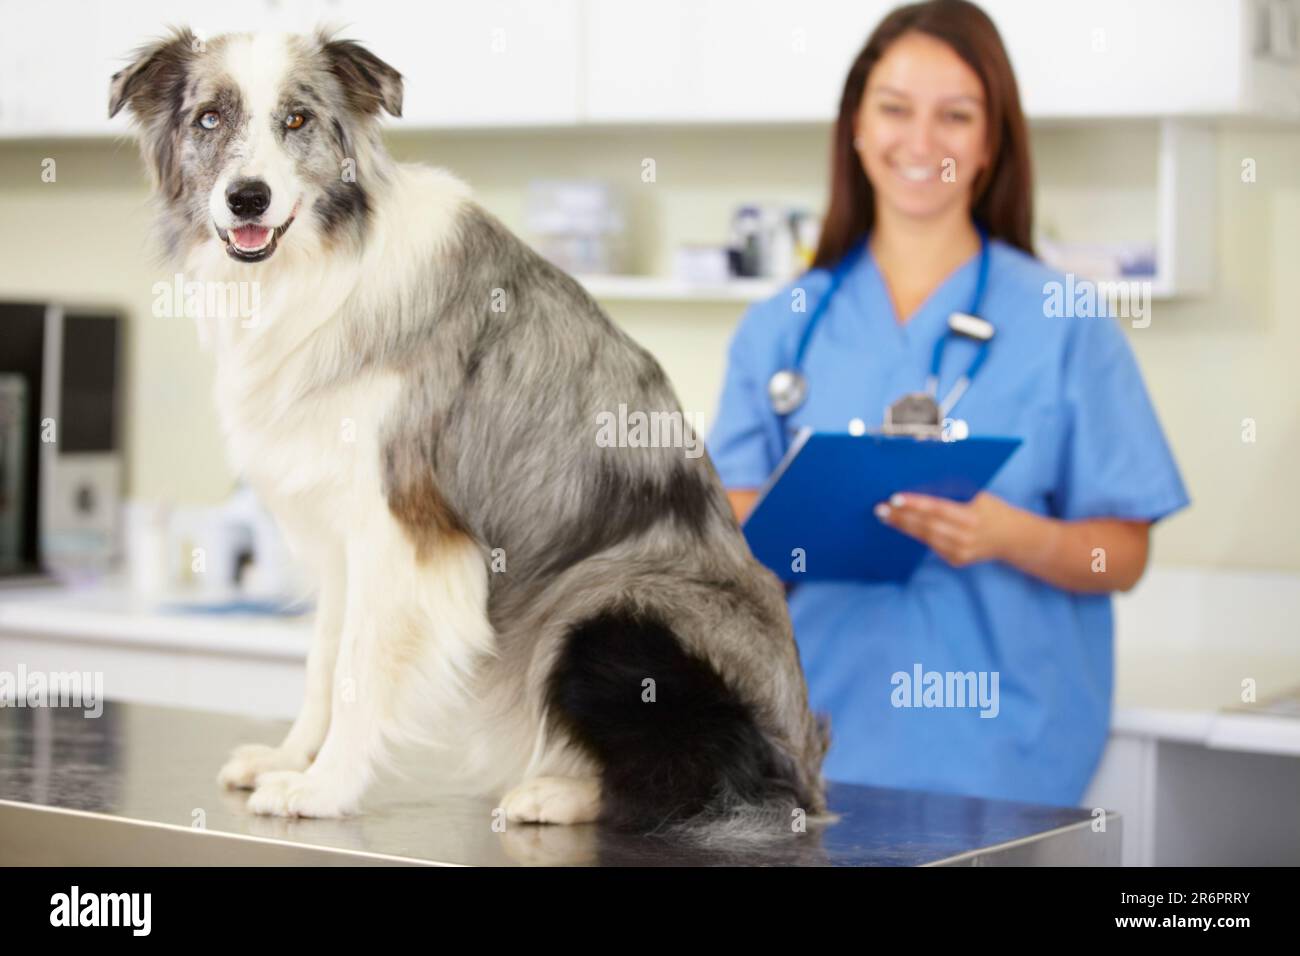 Veterinarian, portrait or dog at veterinary clinic for animal healthcare checkup inspection or nursing. Doctor, history or sick blue merle collie pet Stock Photo